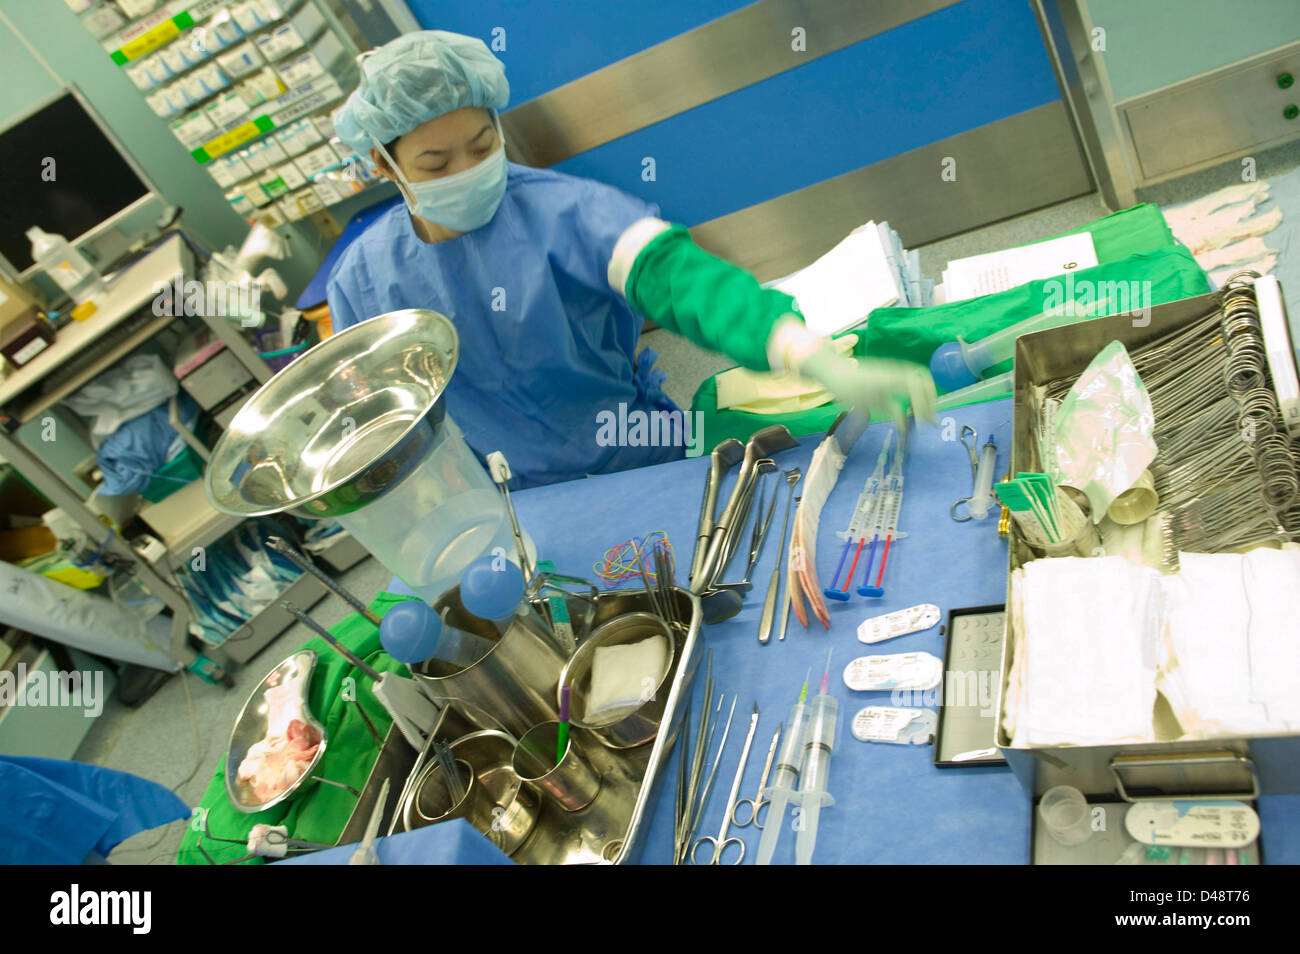 A surgeon prepares instruments and equipment for surgery. Stock Photo